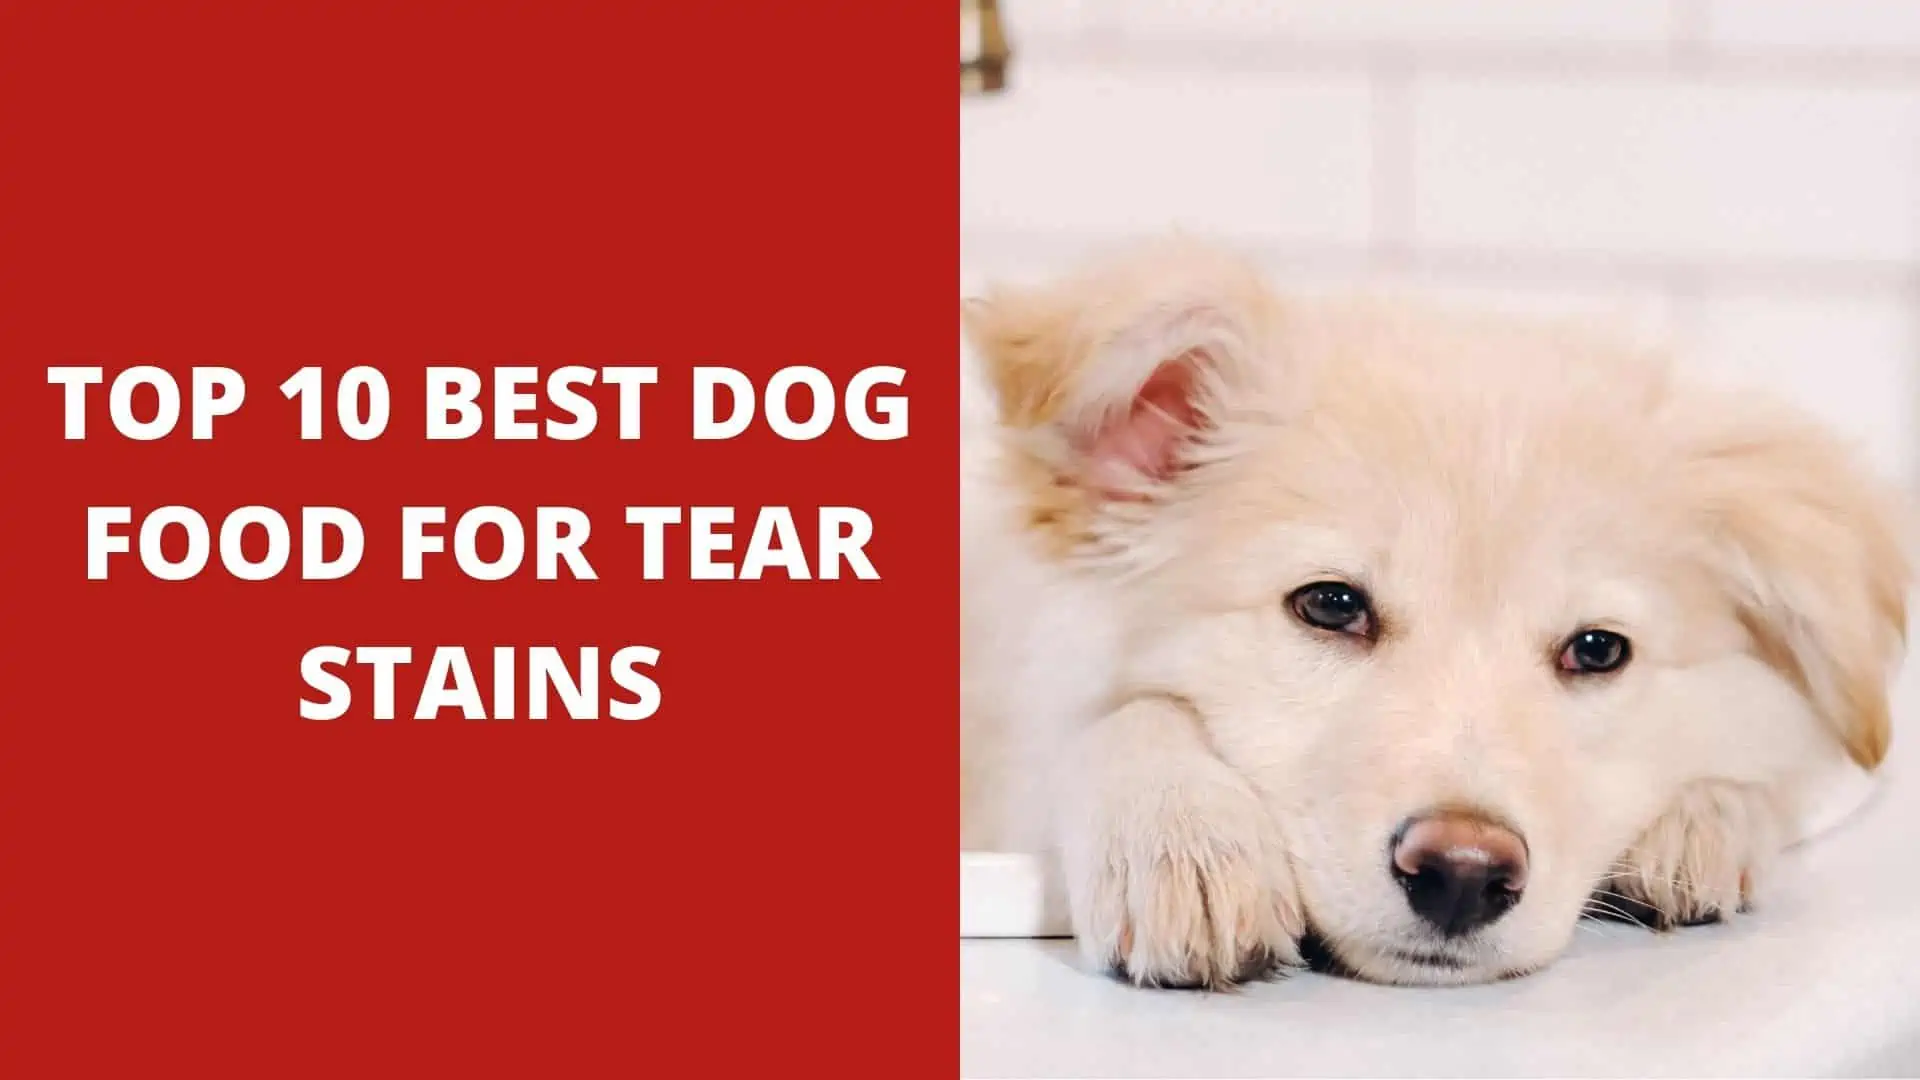 Top 10 Best Dog Food For Tear Stains